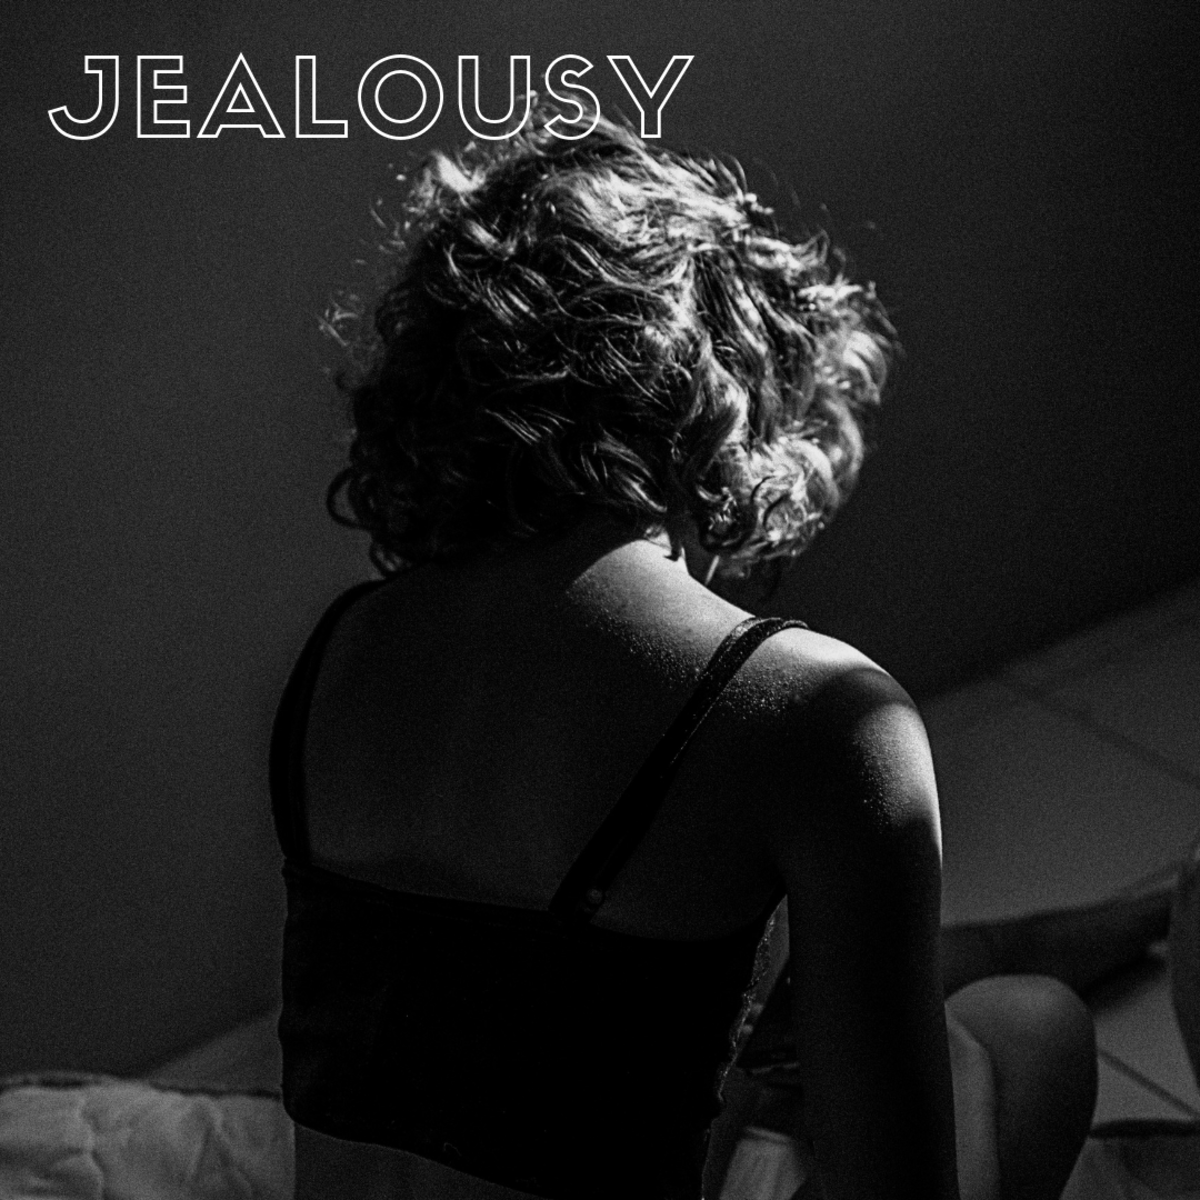 Traits of cheaters: jealousy.